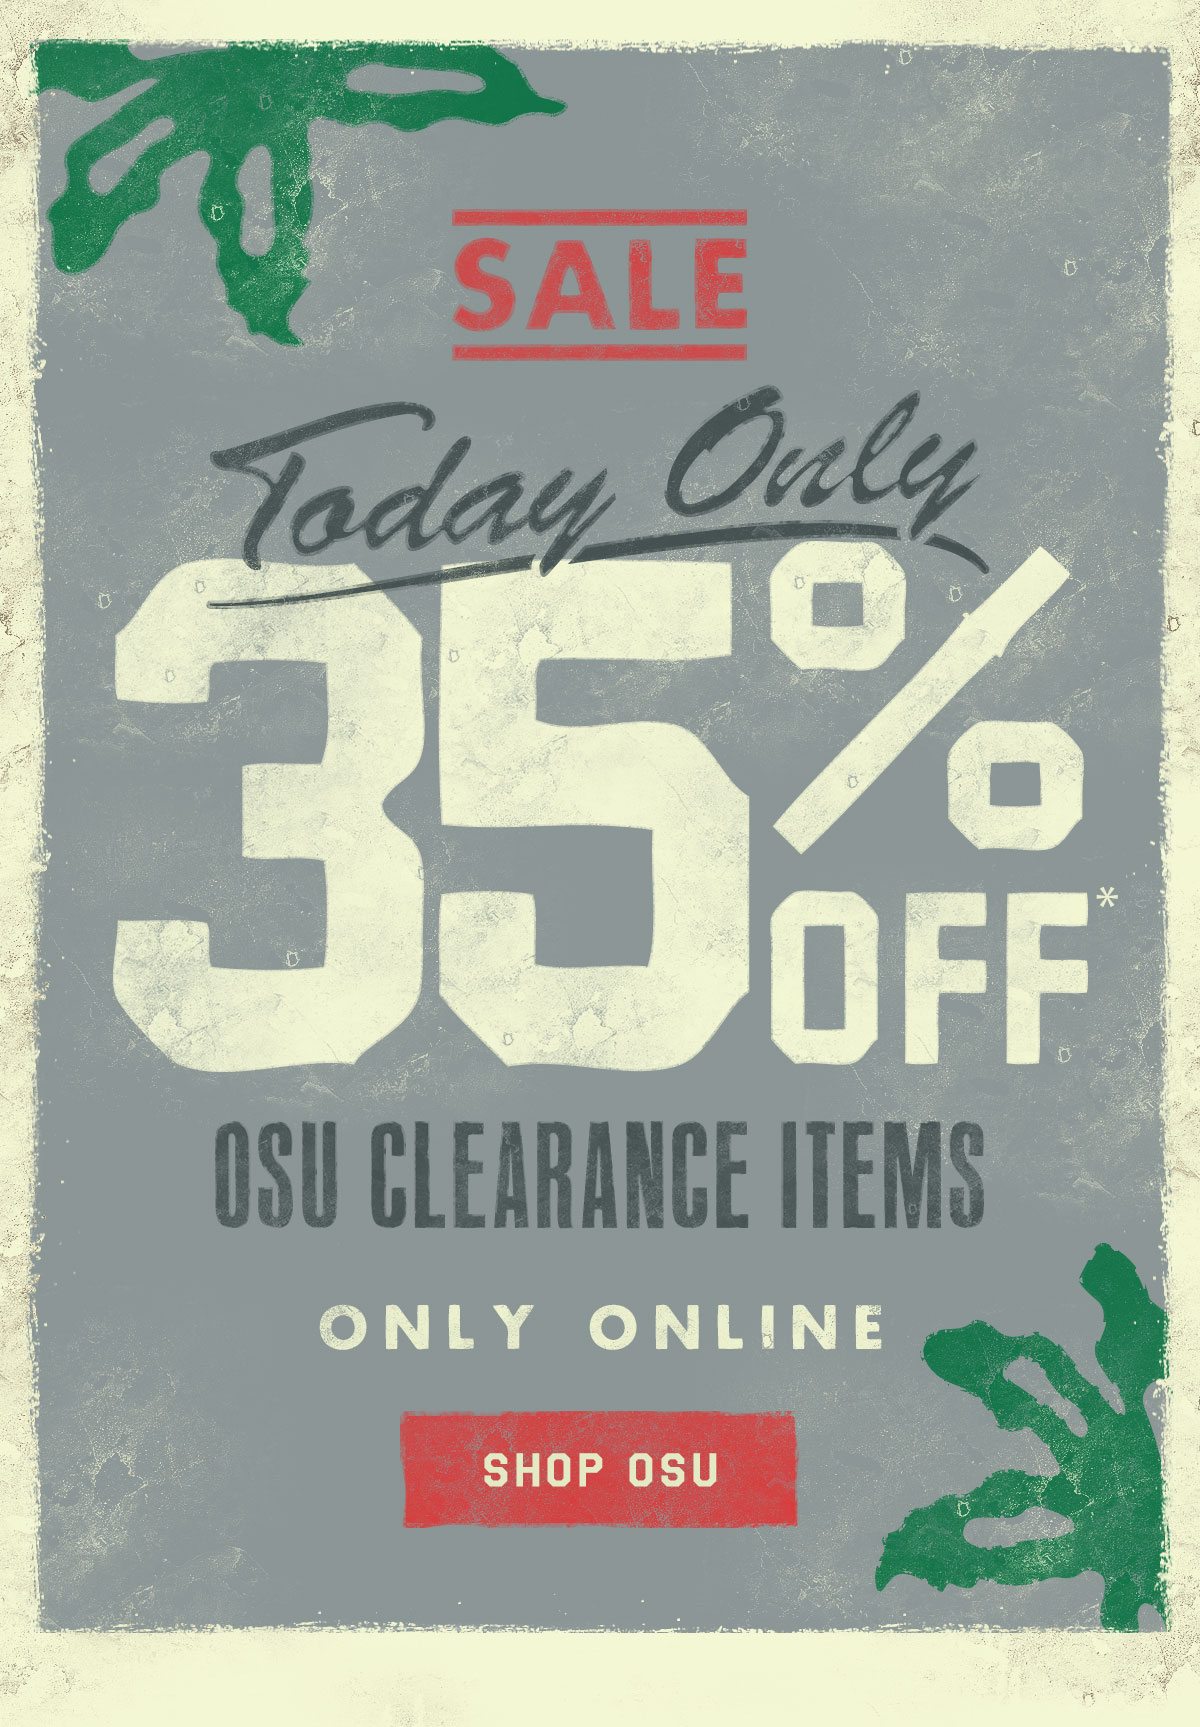 35% off* OSU Clearance Items | Only Online